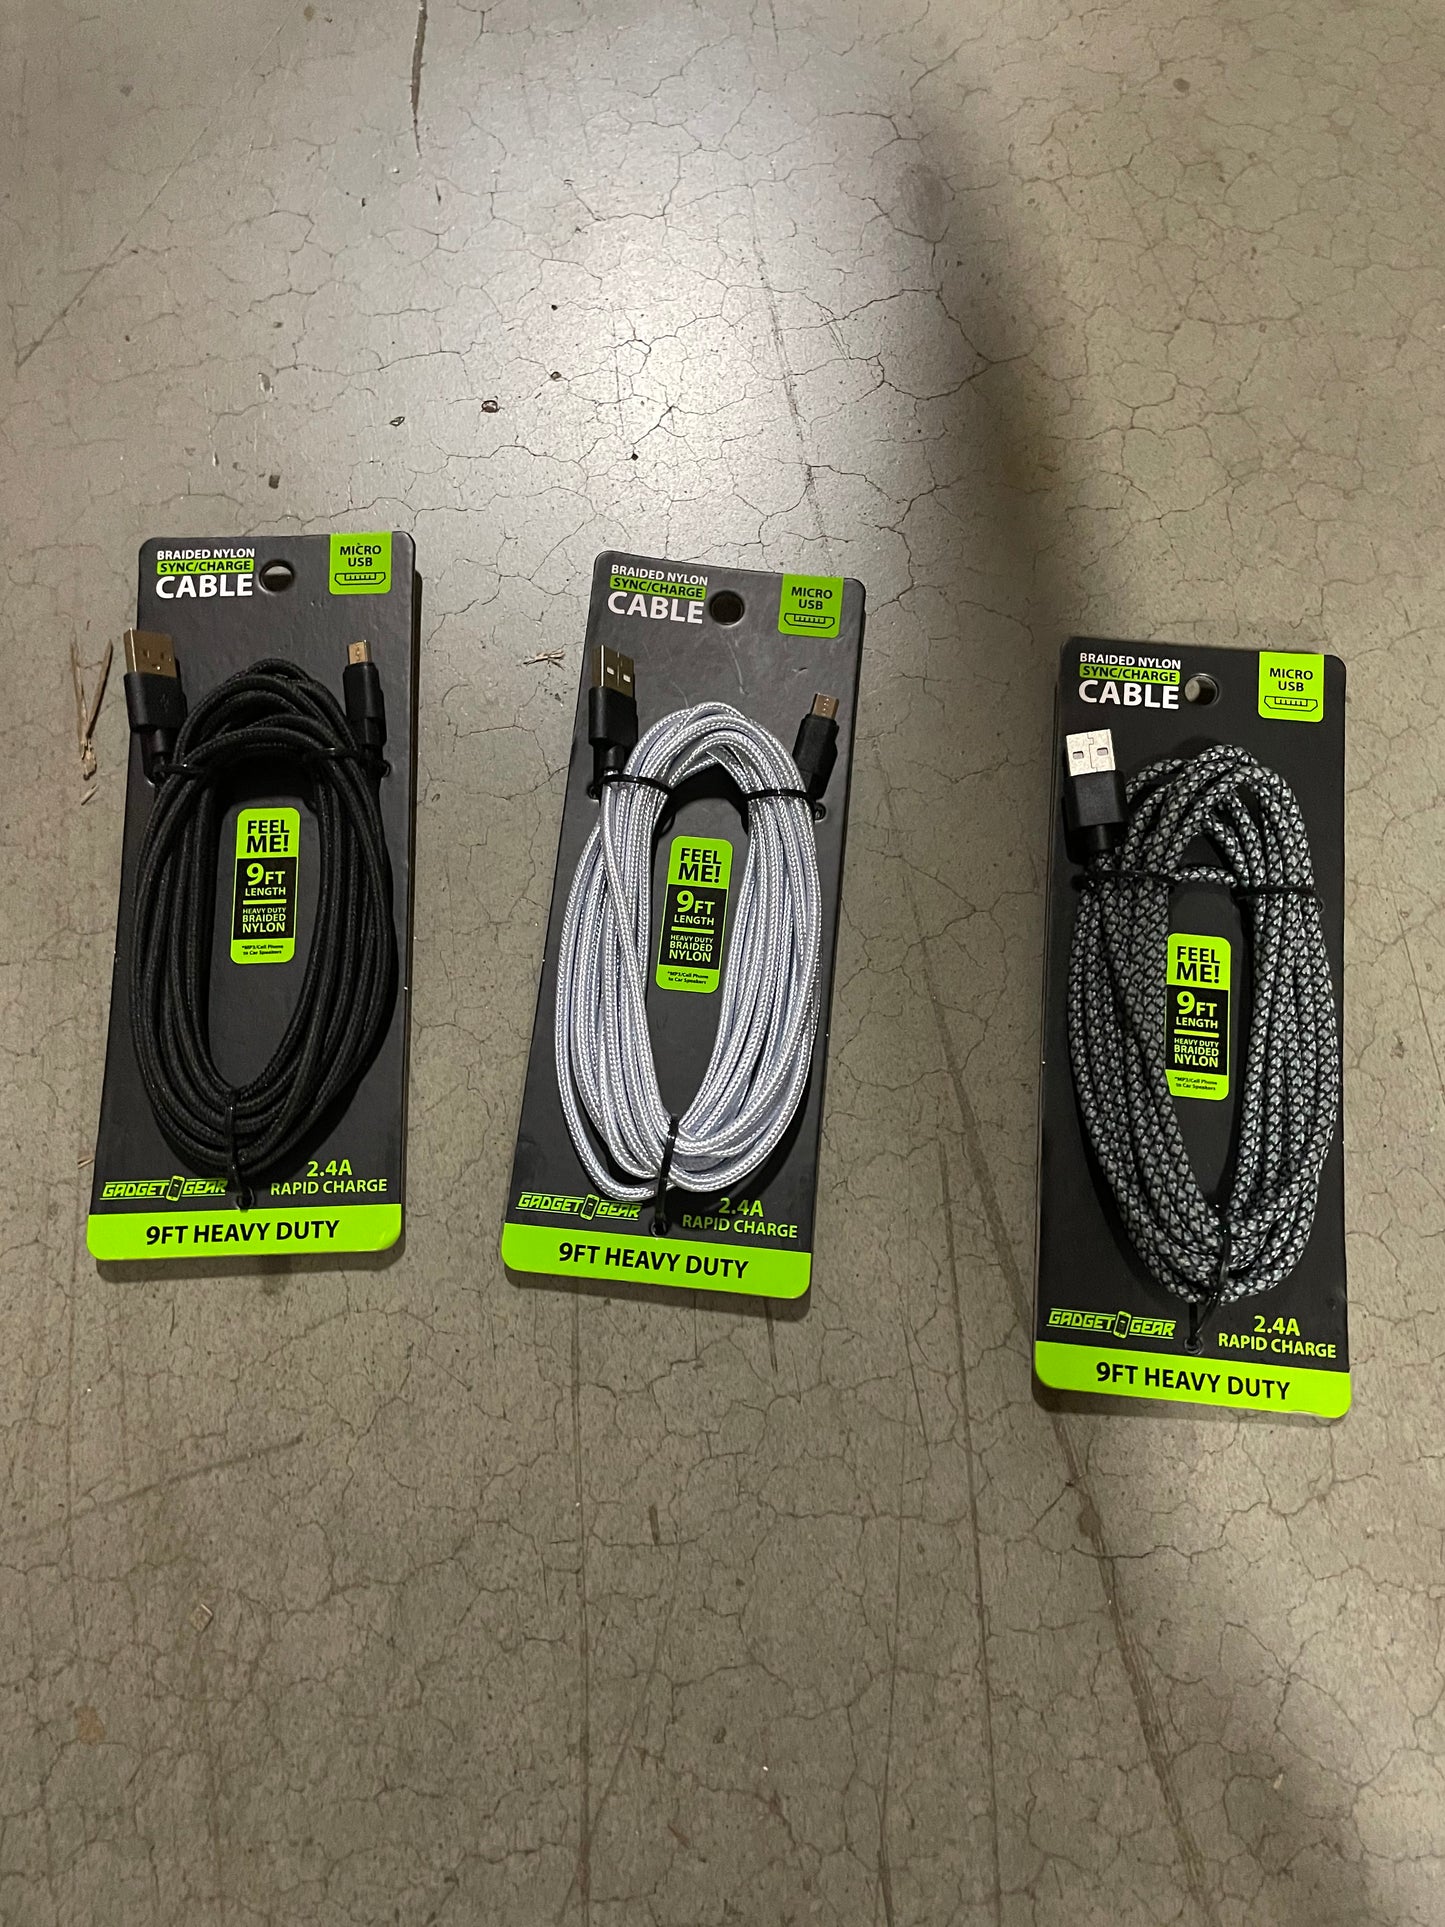 ITEM NUMBER 026510L 9FT CLOTH MICRO CABLE  - STORE SURPLUS NO DISPLAY 6 PIECES PER PACK